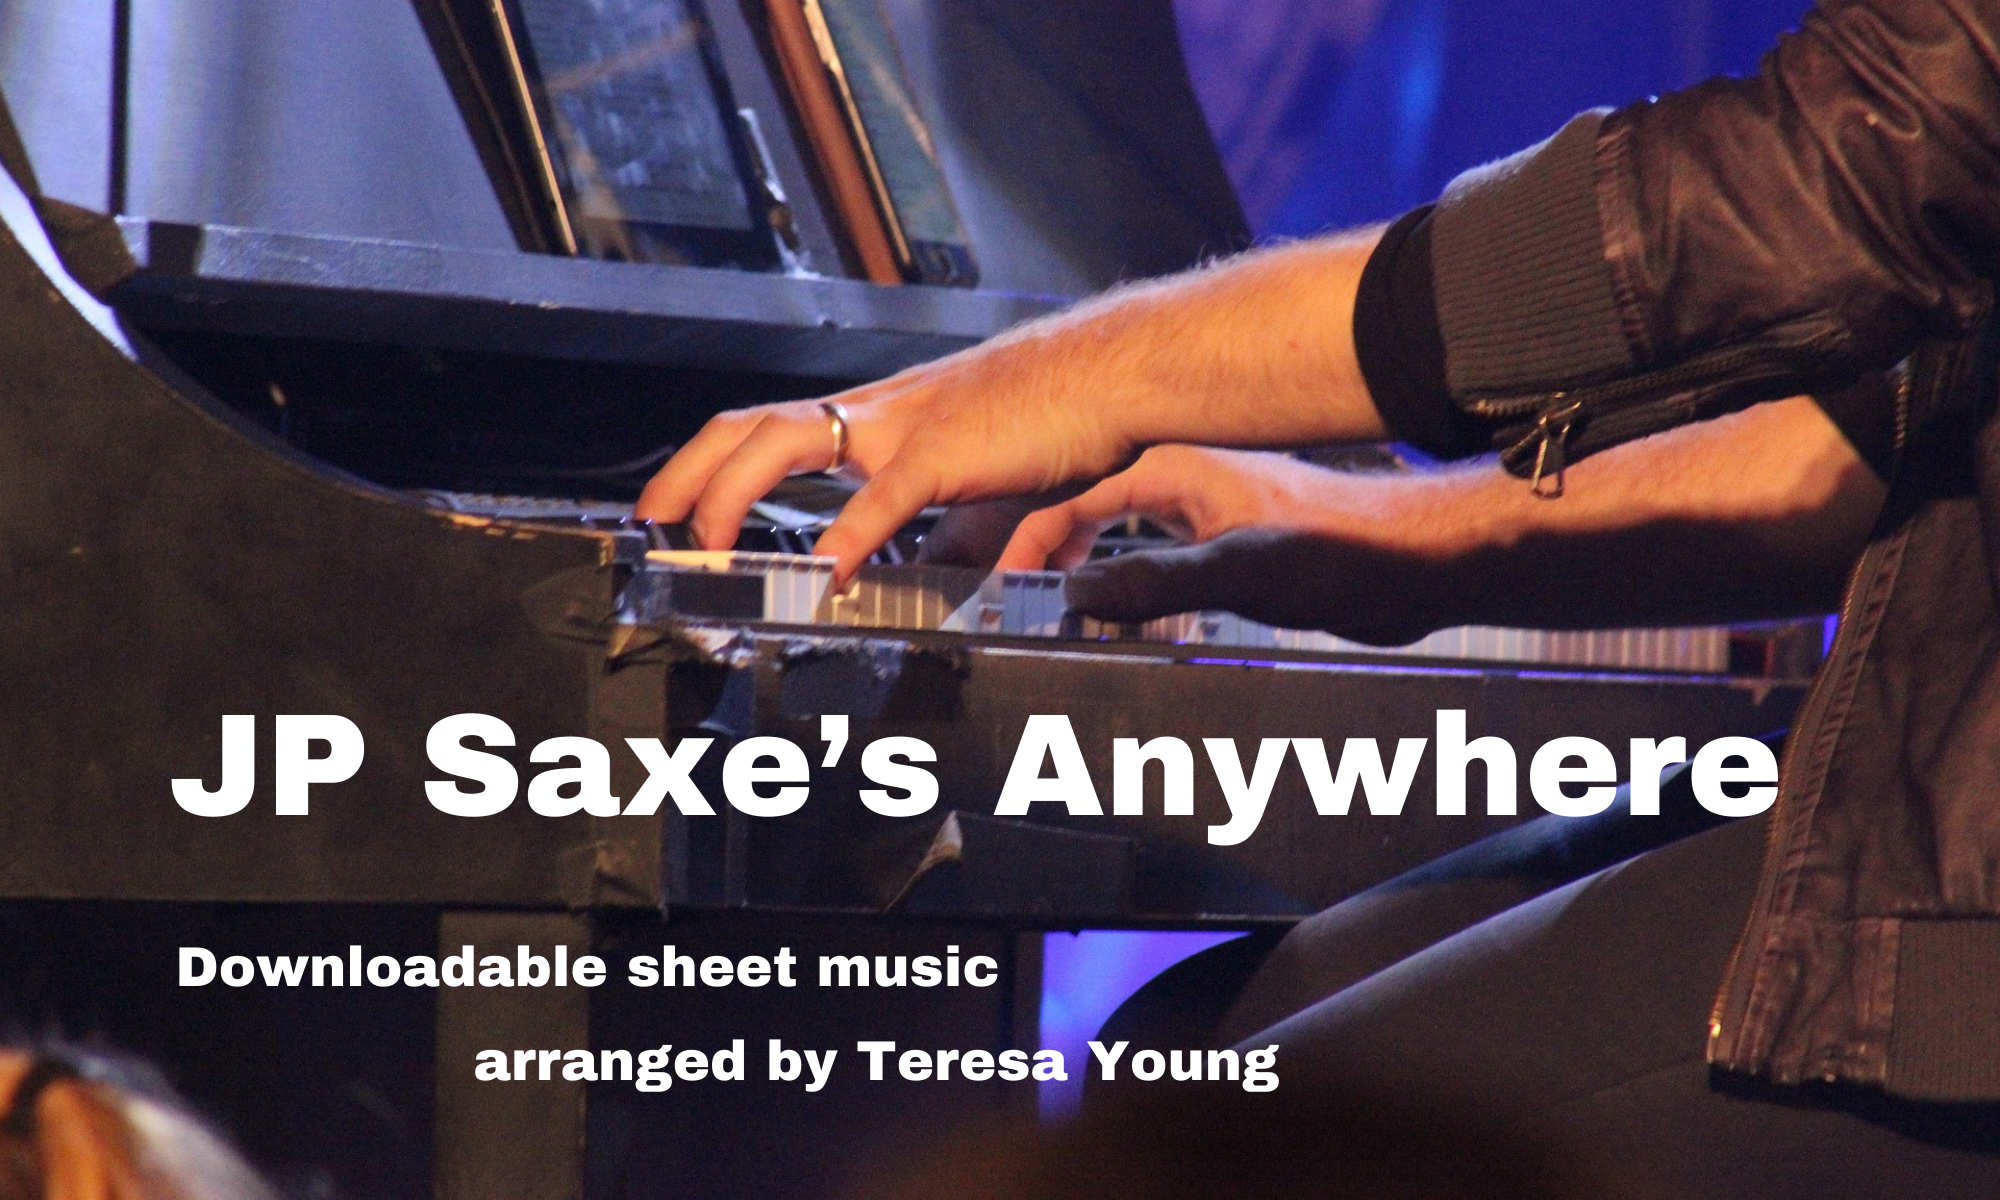 JP Saxe's Anywhere, arr. by Teresa Young